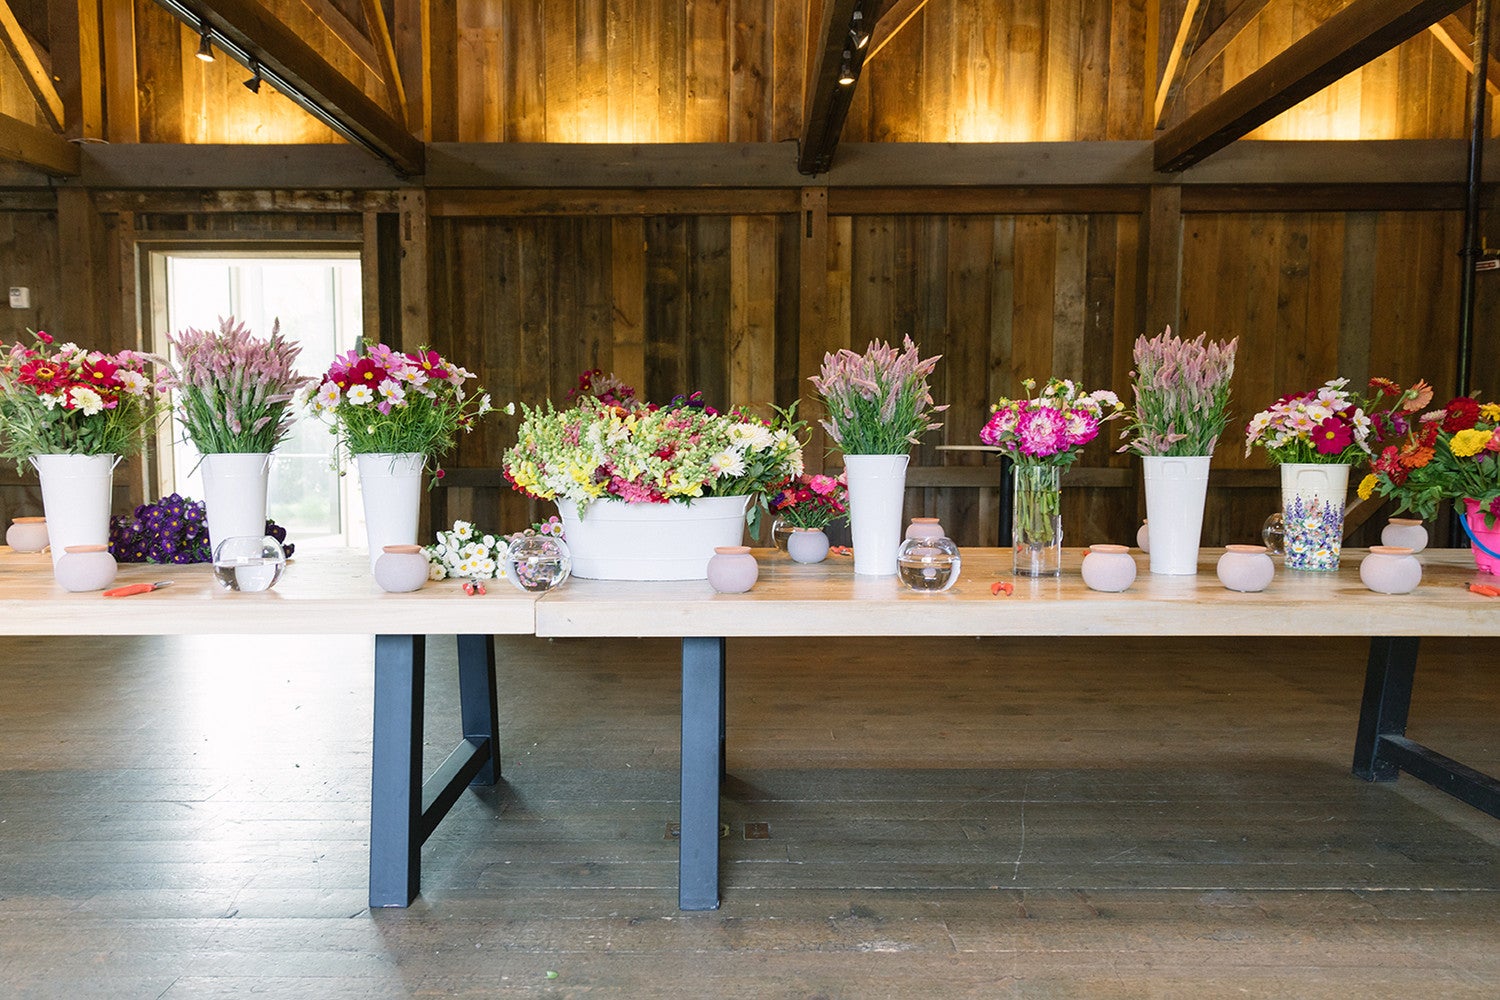 How to Elevate Your Farm Stand Flowers